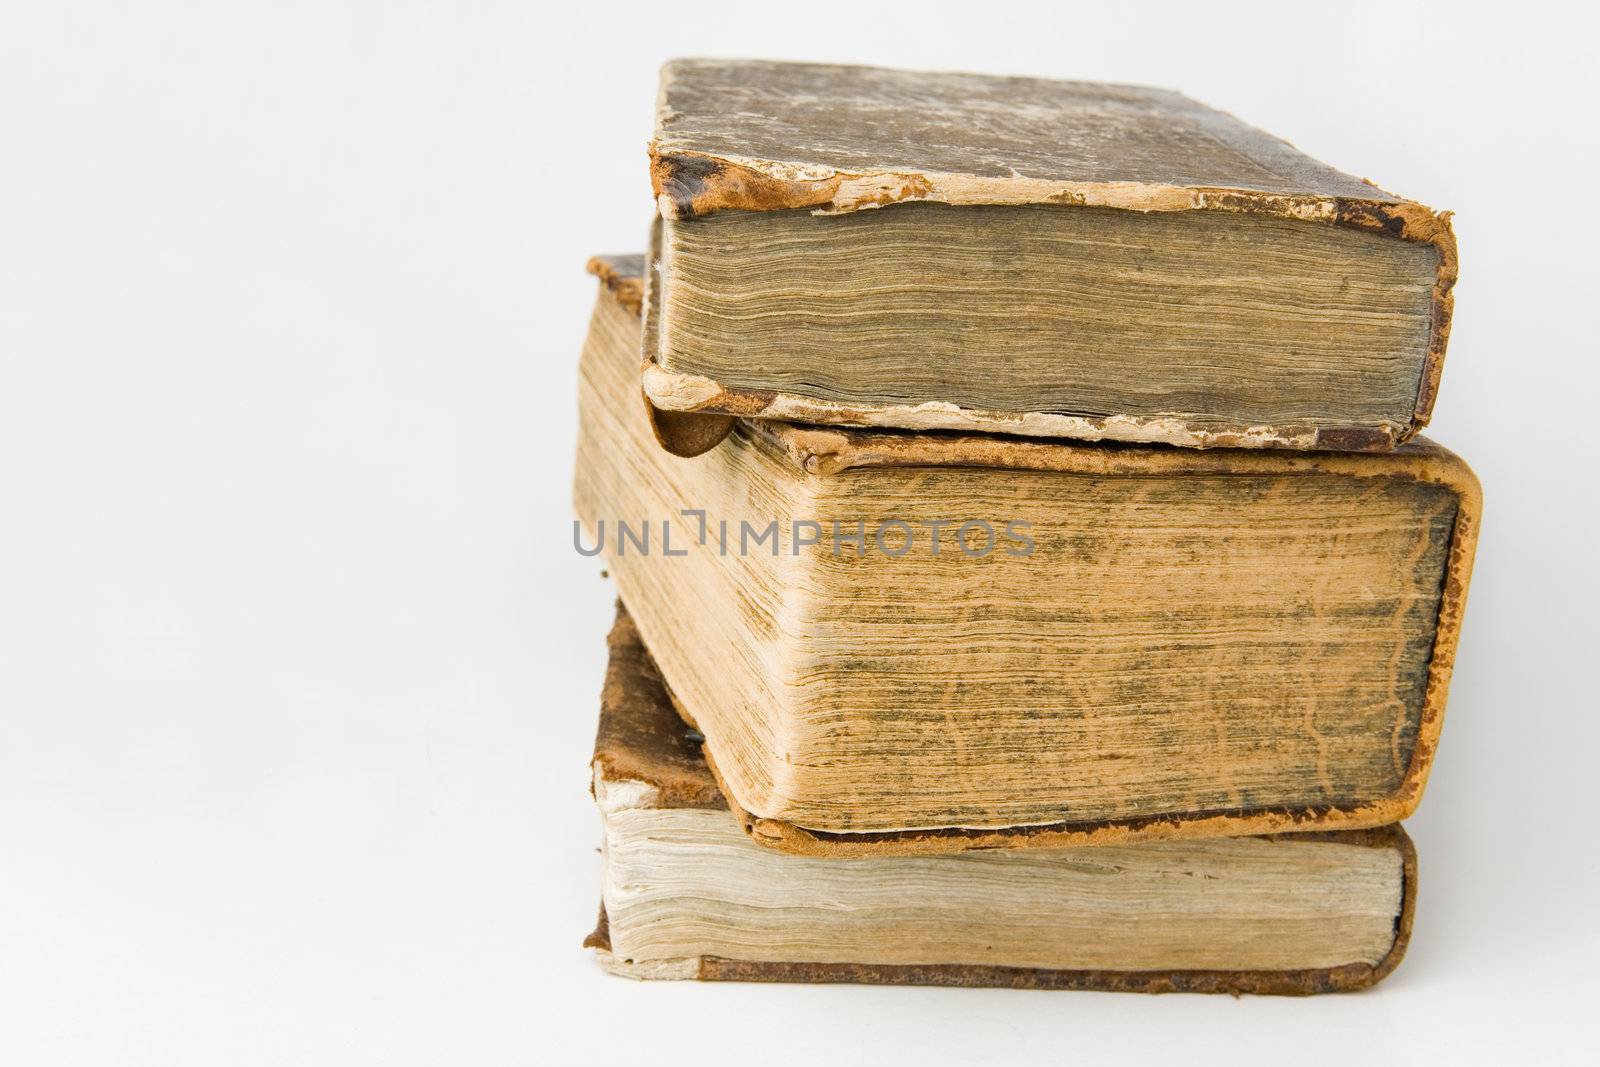 Antique Books by Luminis